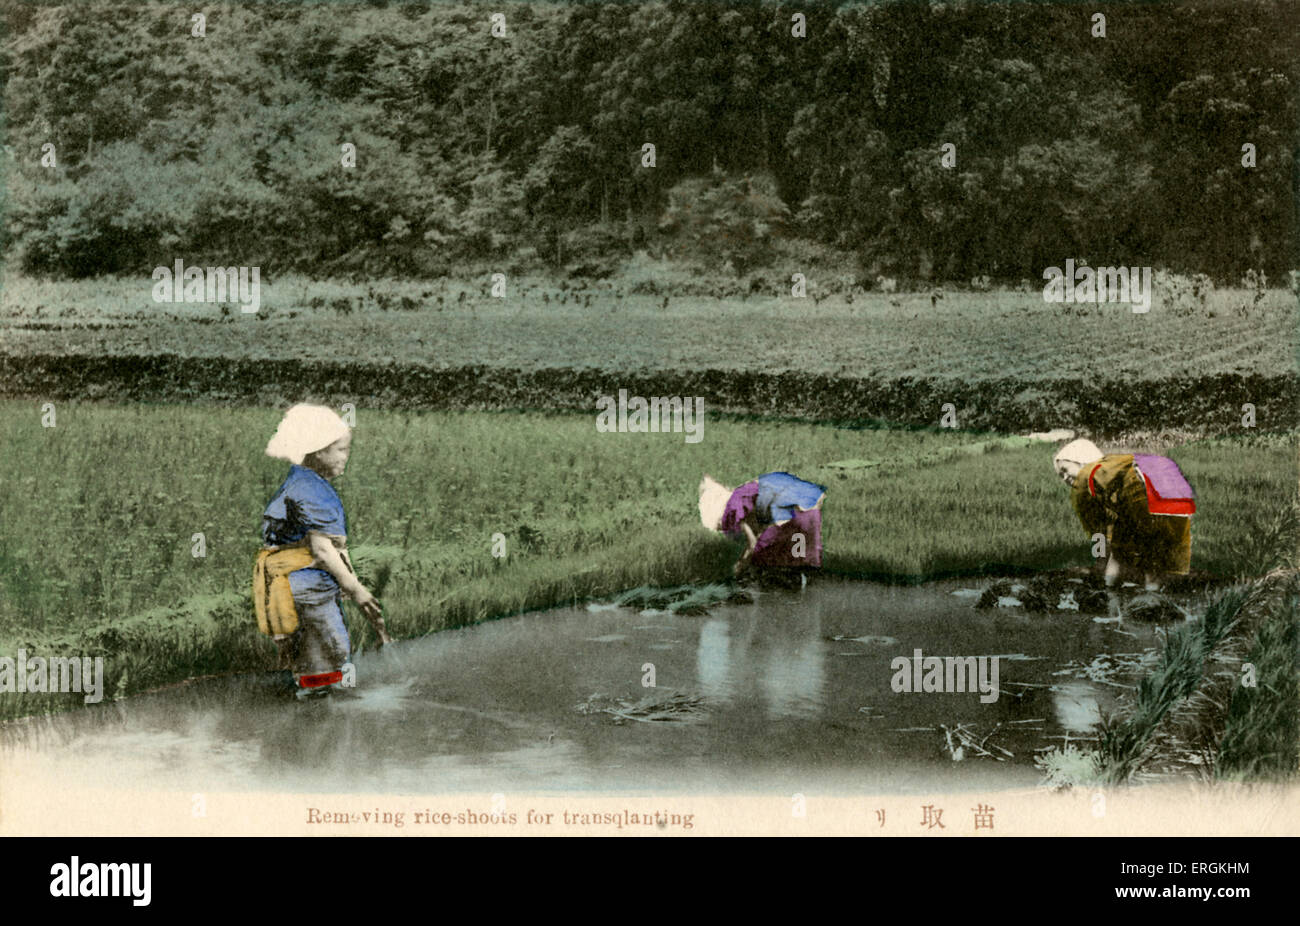 Japanese workers removing rice-shoots to be transplanted, late Meiji period (1868-1912). Seedlings are transplanted in order to Stock Photo